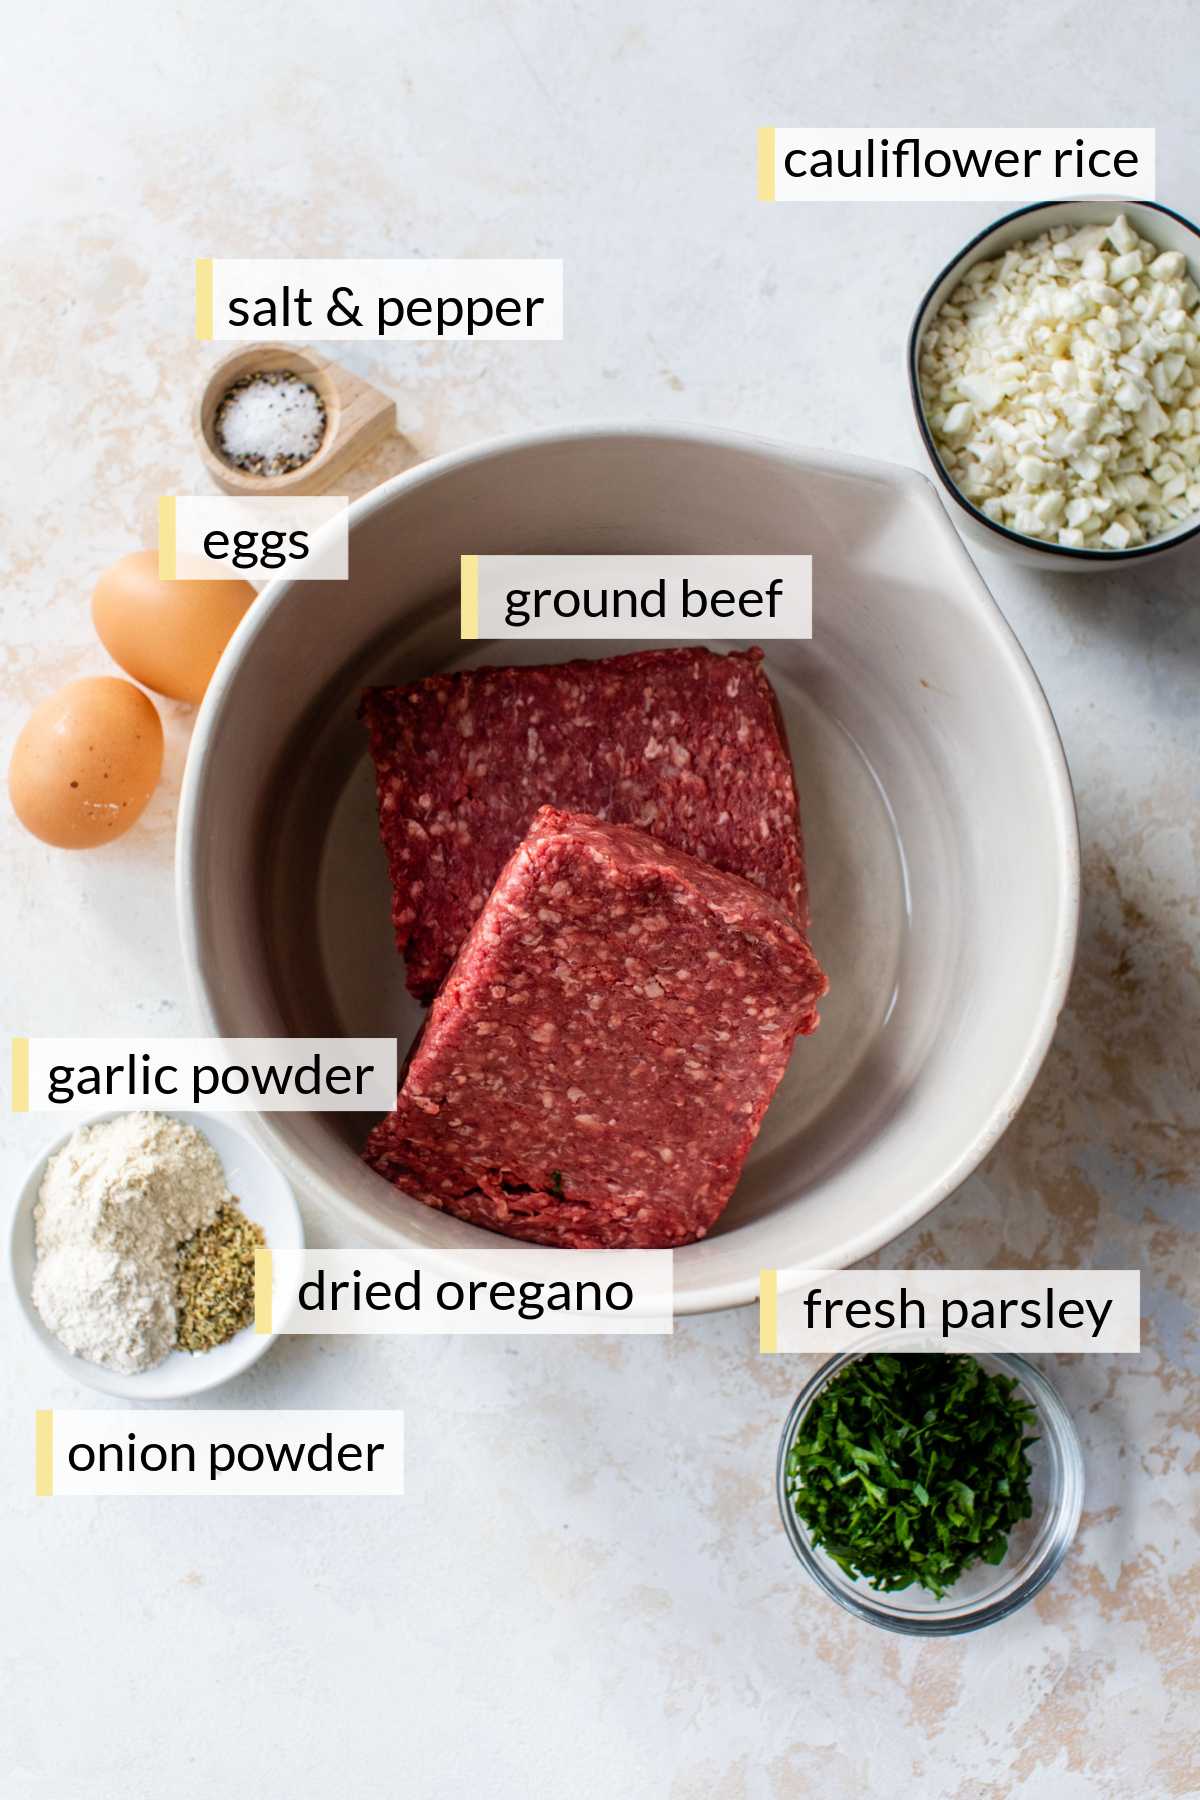 Ground beef, eggs, cauliflower rice, parsley and seasonings divided into portions.